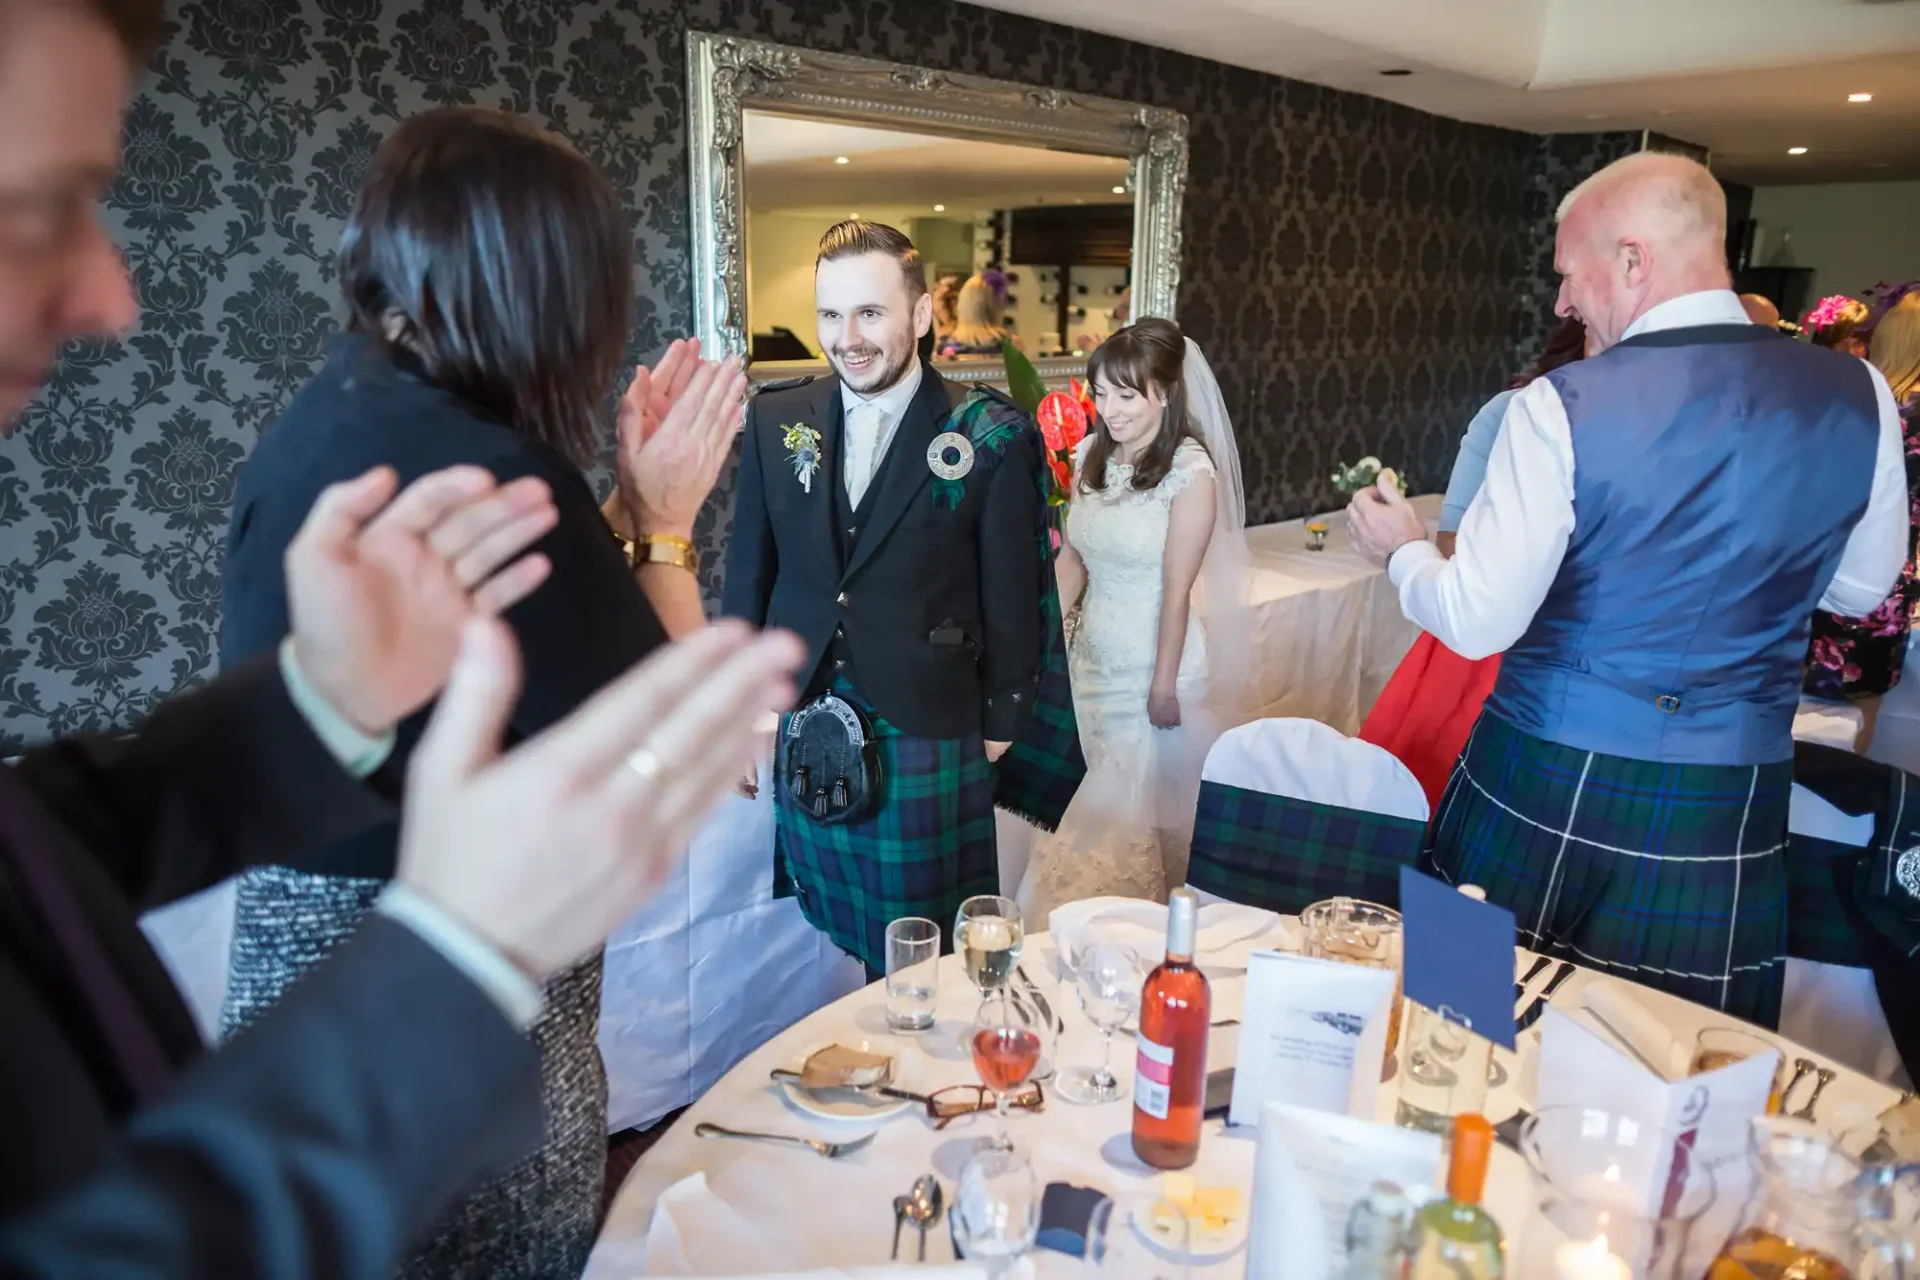 A bride and groom walking through a clapping crowd at a wedding reception, with guests wearing scottish kilts.